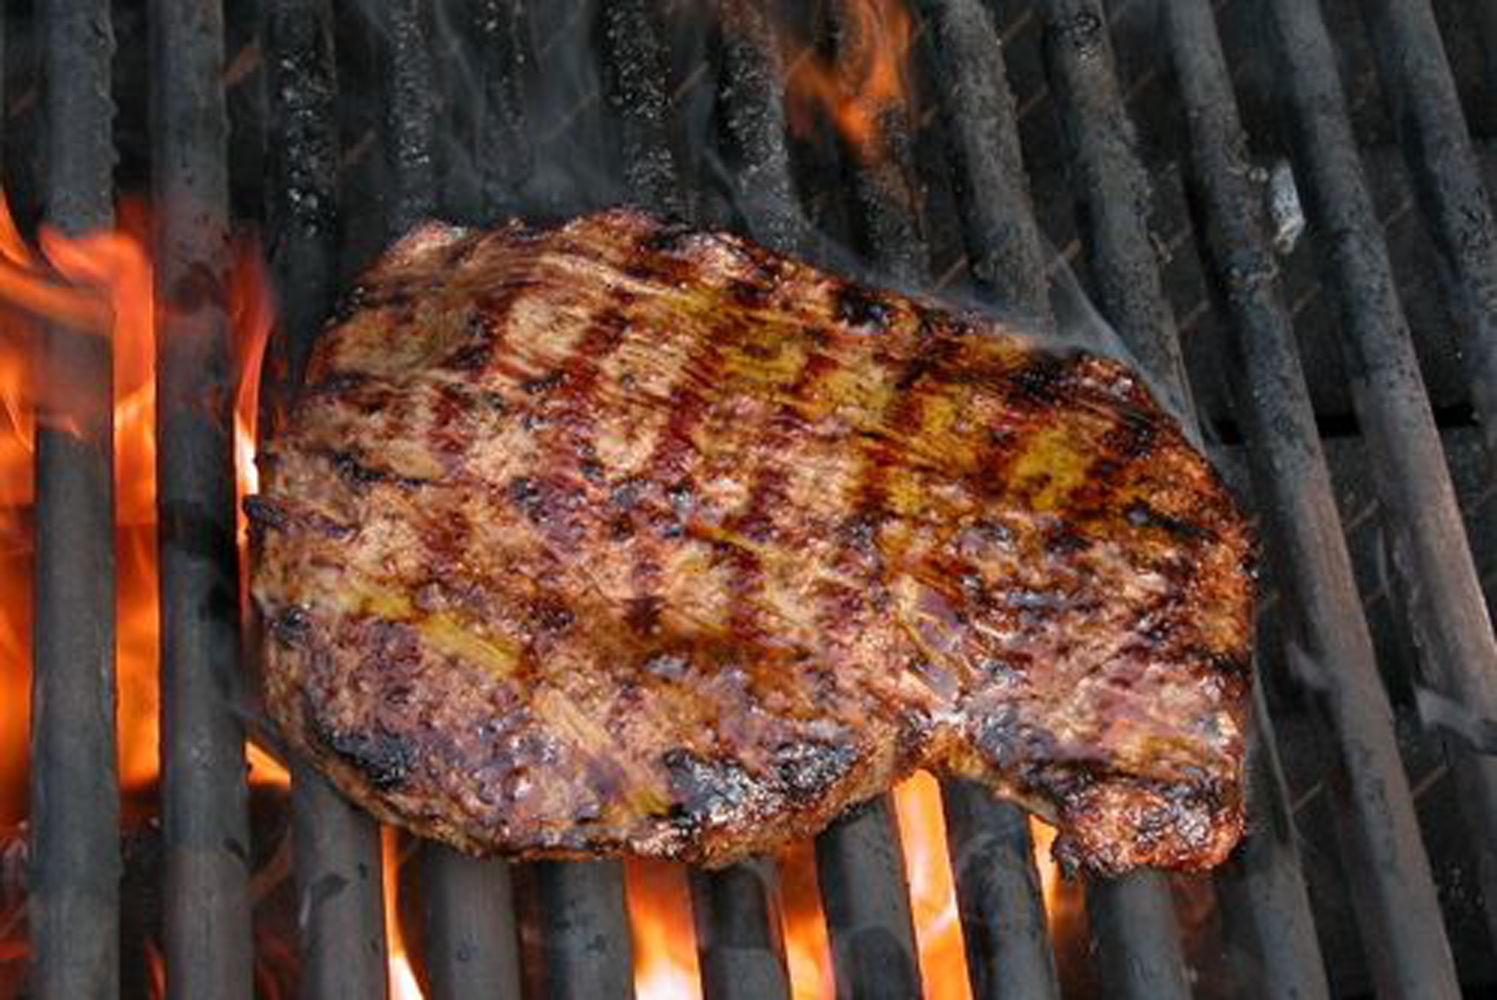 Gallery: Getting Perfect Grill Marks